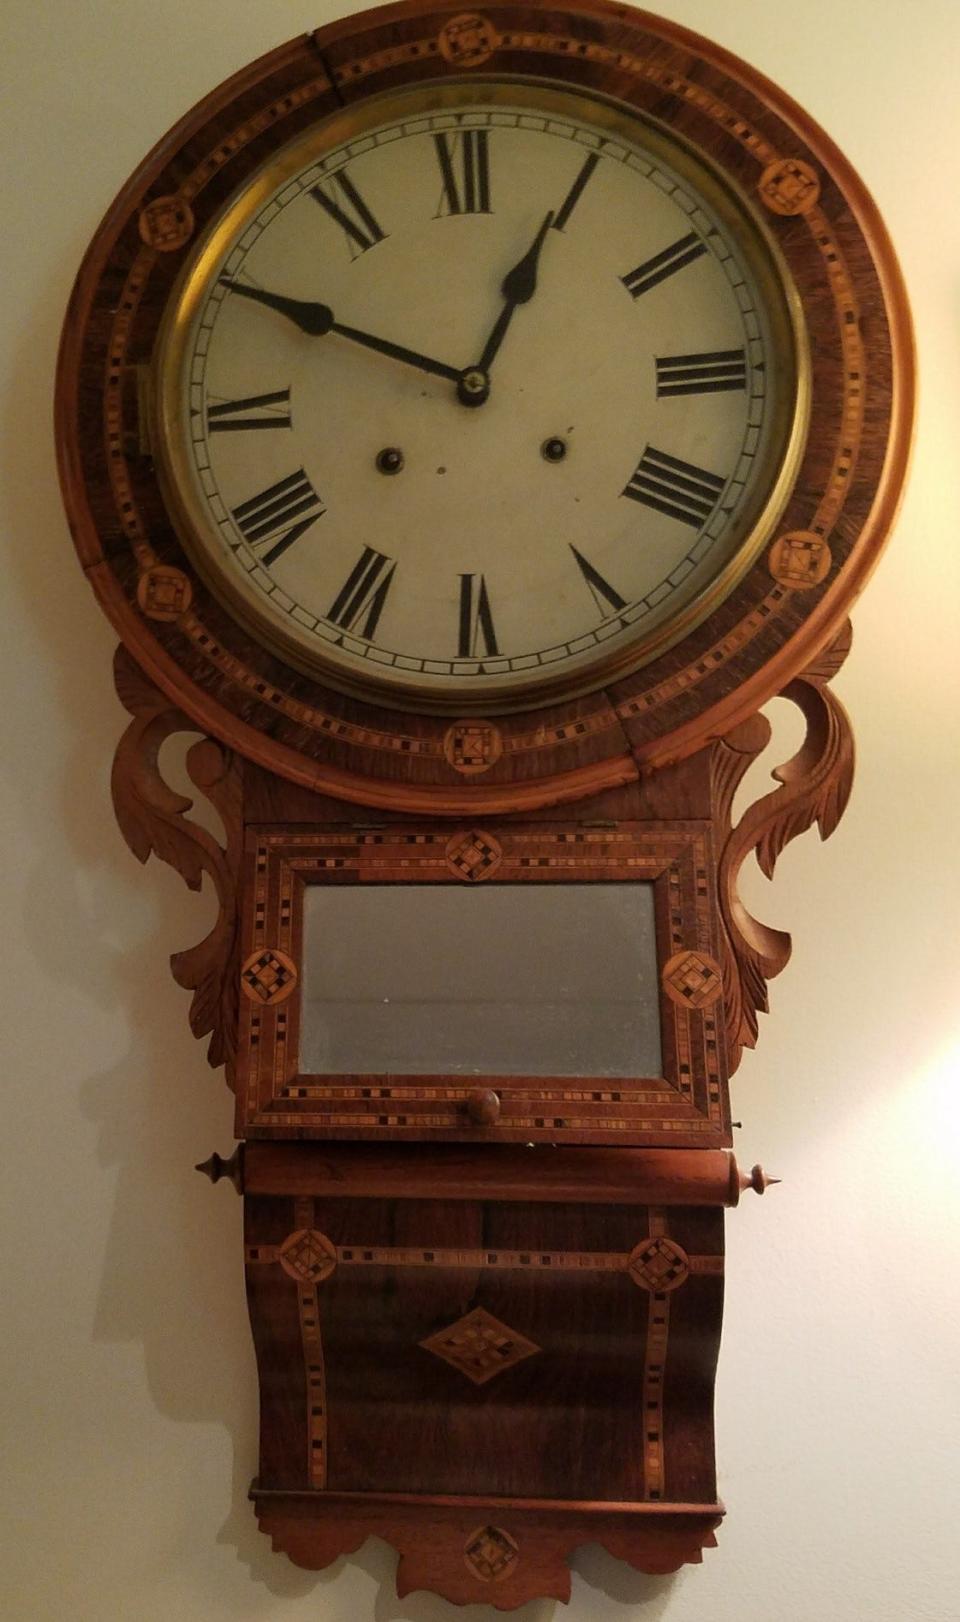 Wall clock with pendulum and a marquetry-decorated wood case.